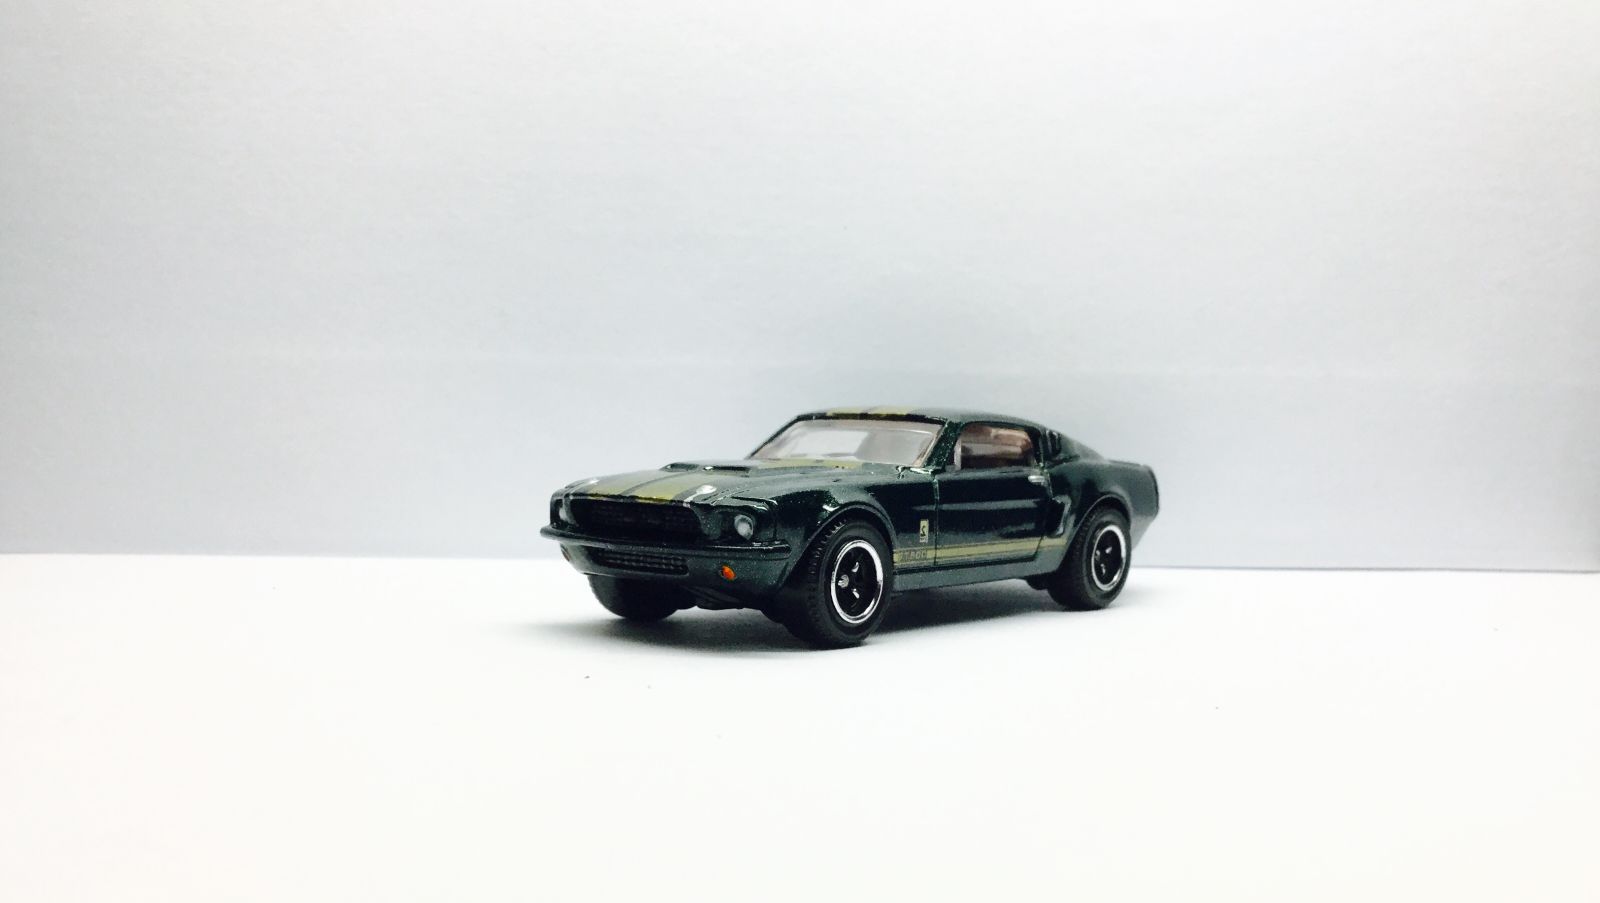 Illustration for article titled Wheelswapped Mustangs... And something else